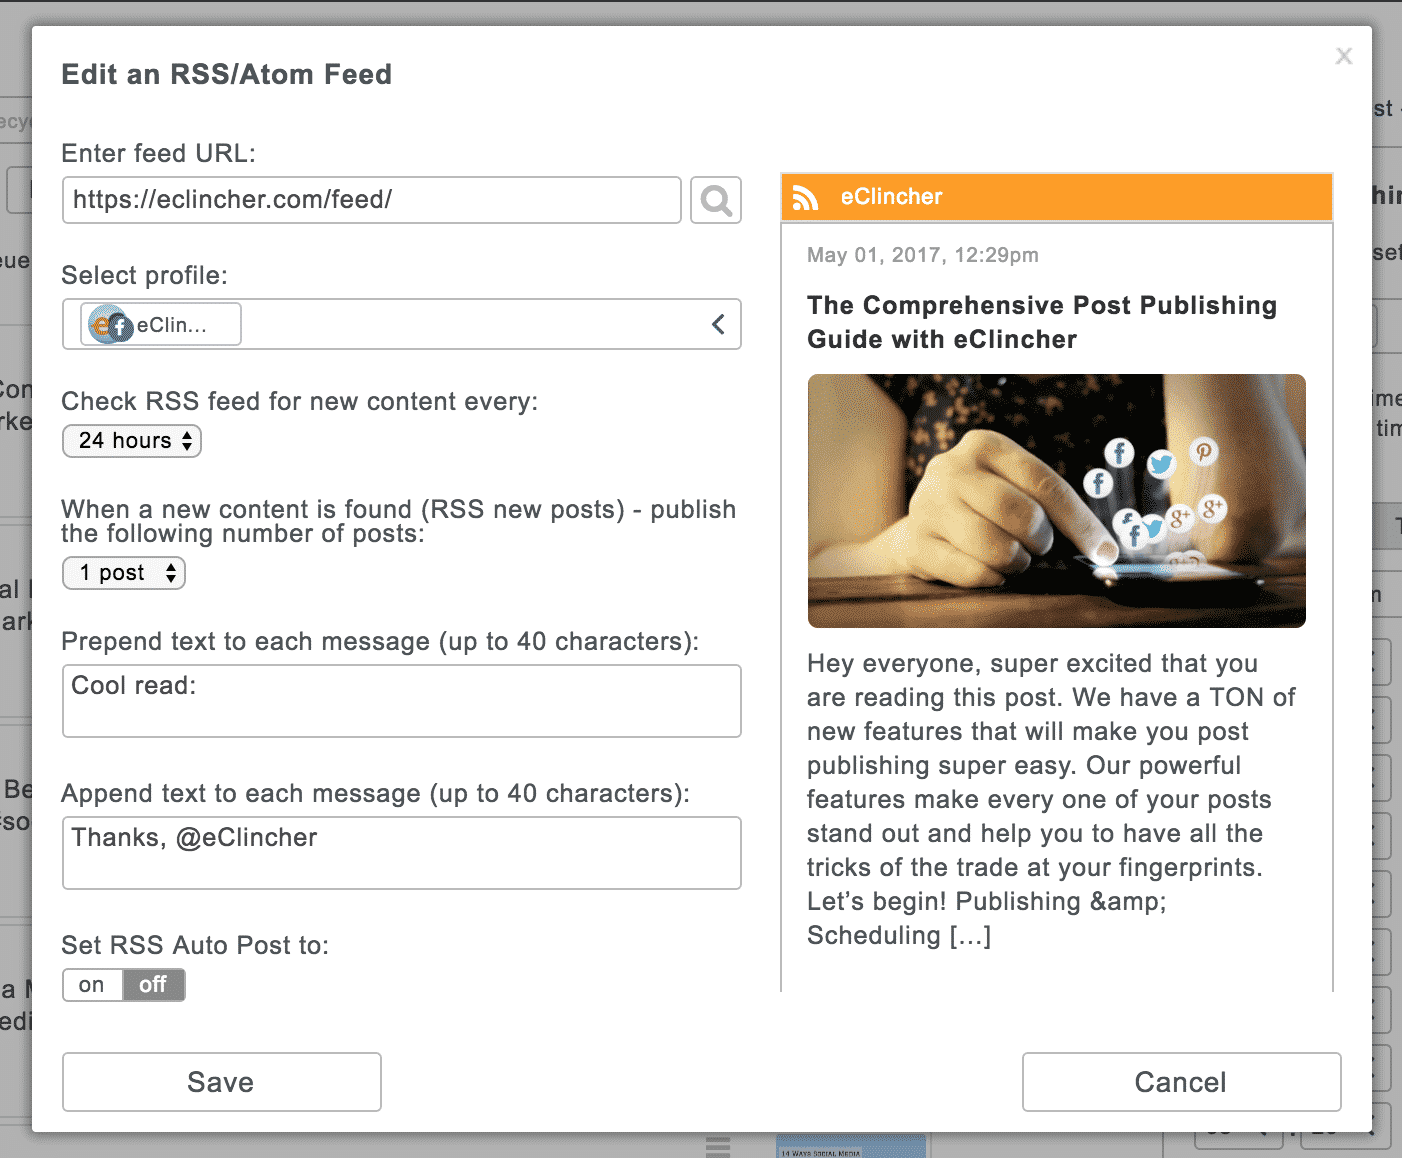 Auto Post with RSS feeds settings - Automatically post fresh new content from RSS feeds.